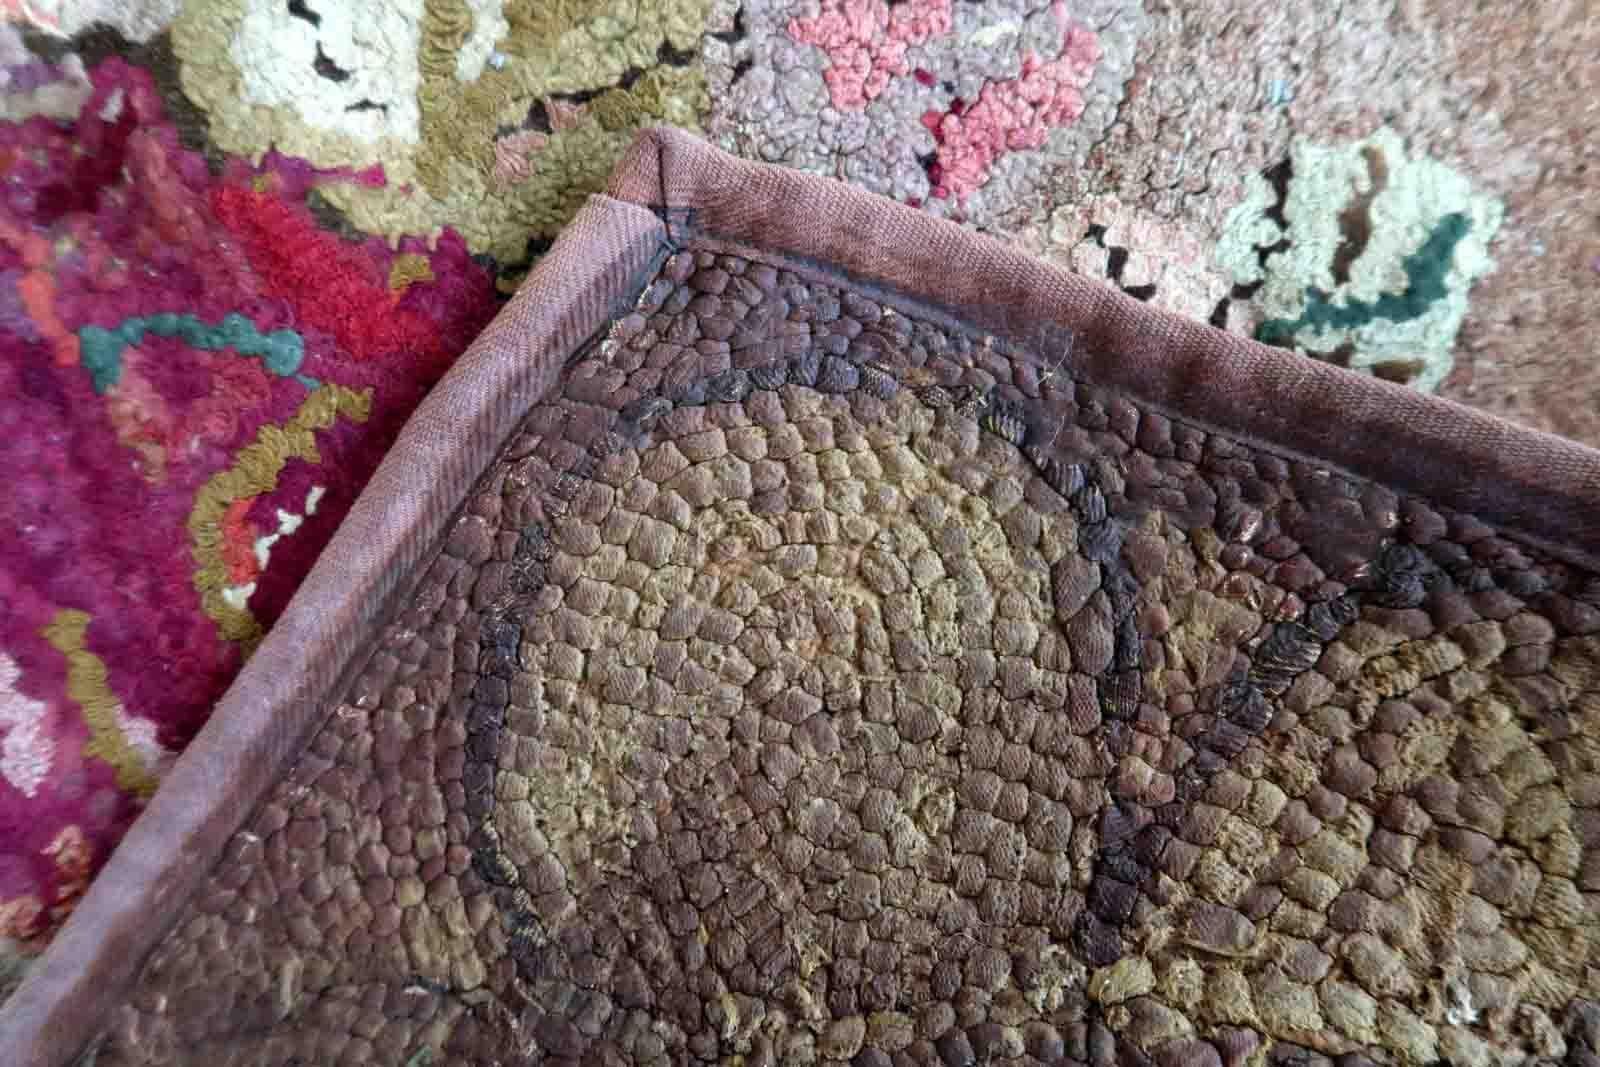 Handmade antique American Hooked rug in primitive floral design. The rug is from the end of 19th century. It has some old restorations, the back side has some old glue on it(we will cover it with fabric to make it stronger).

-condition: